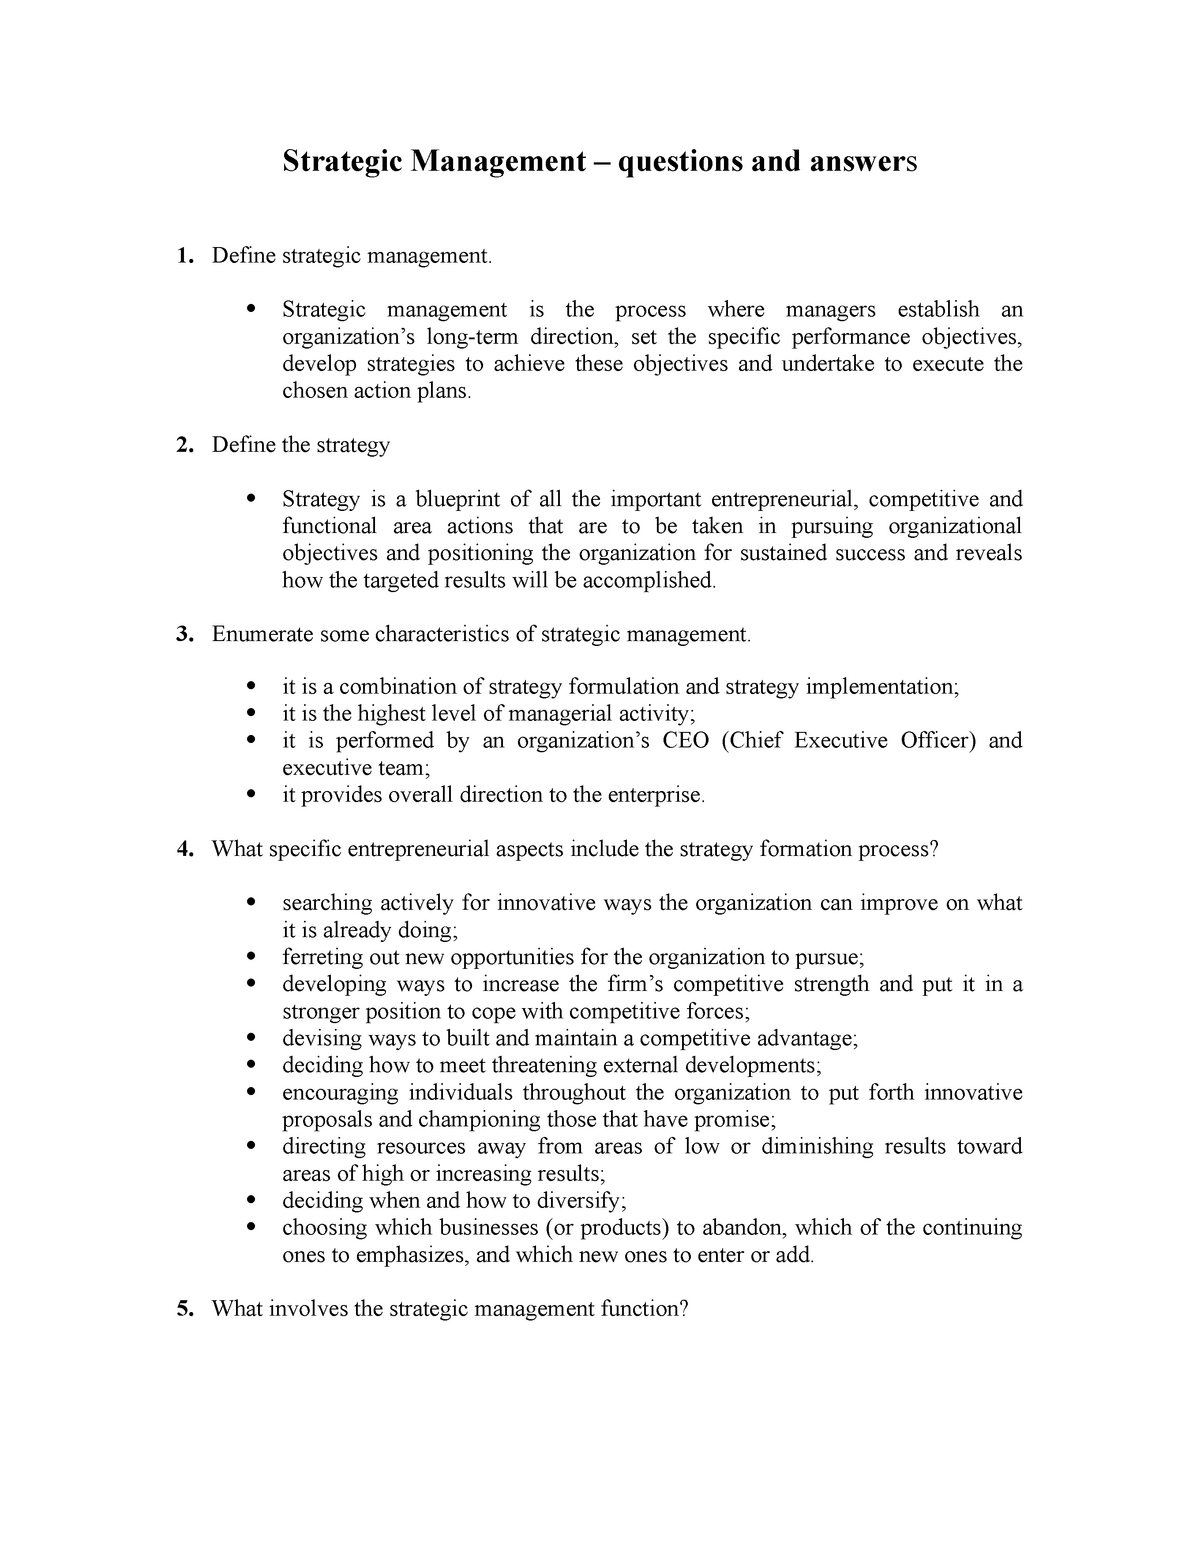 strategic management essay questions and answers pdf